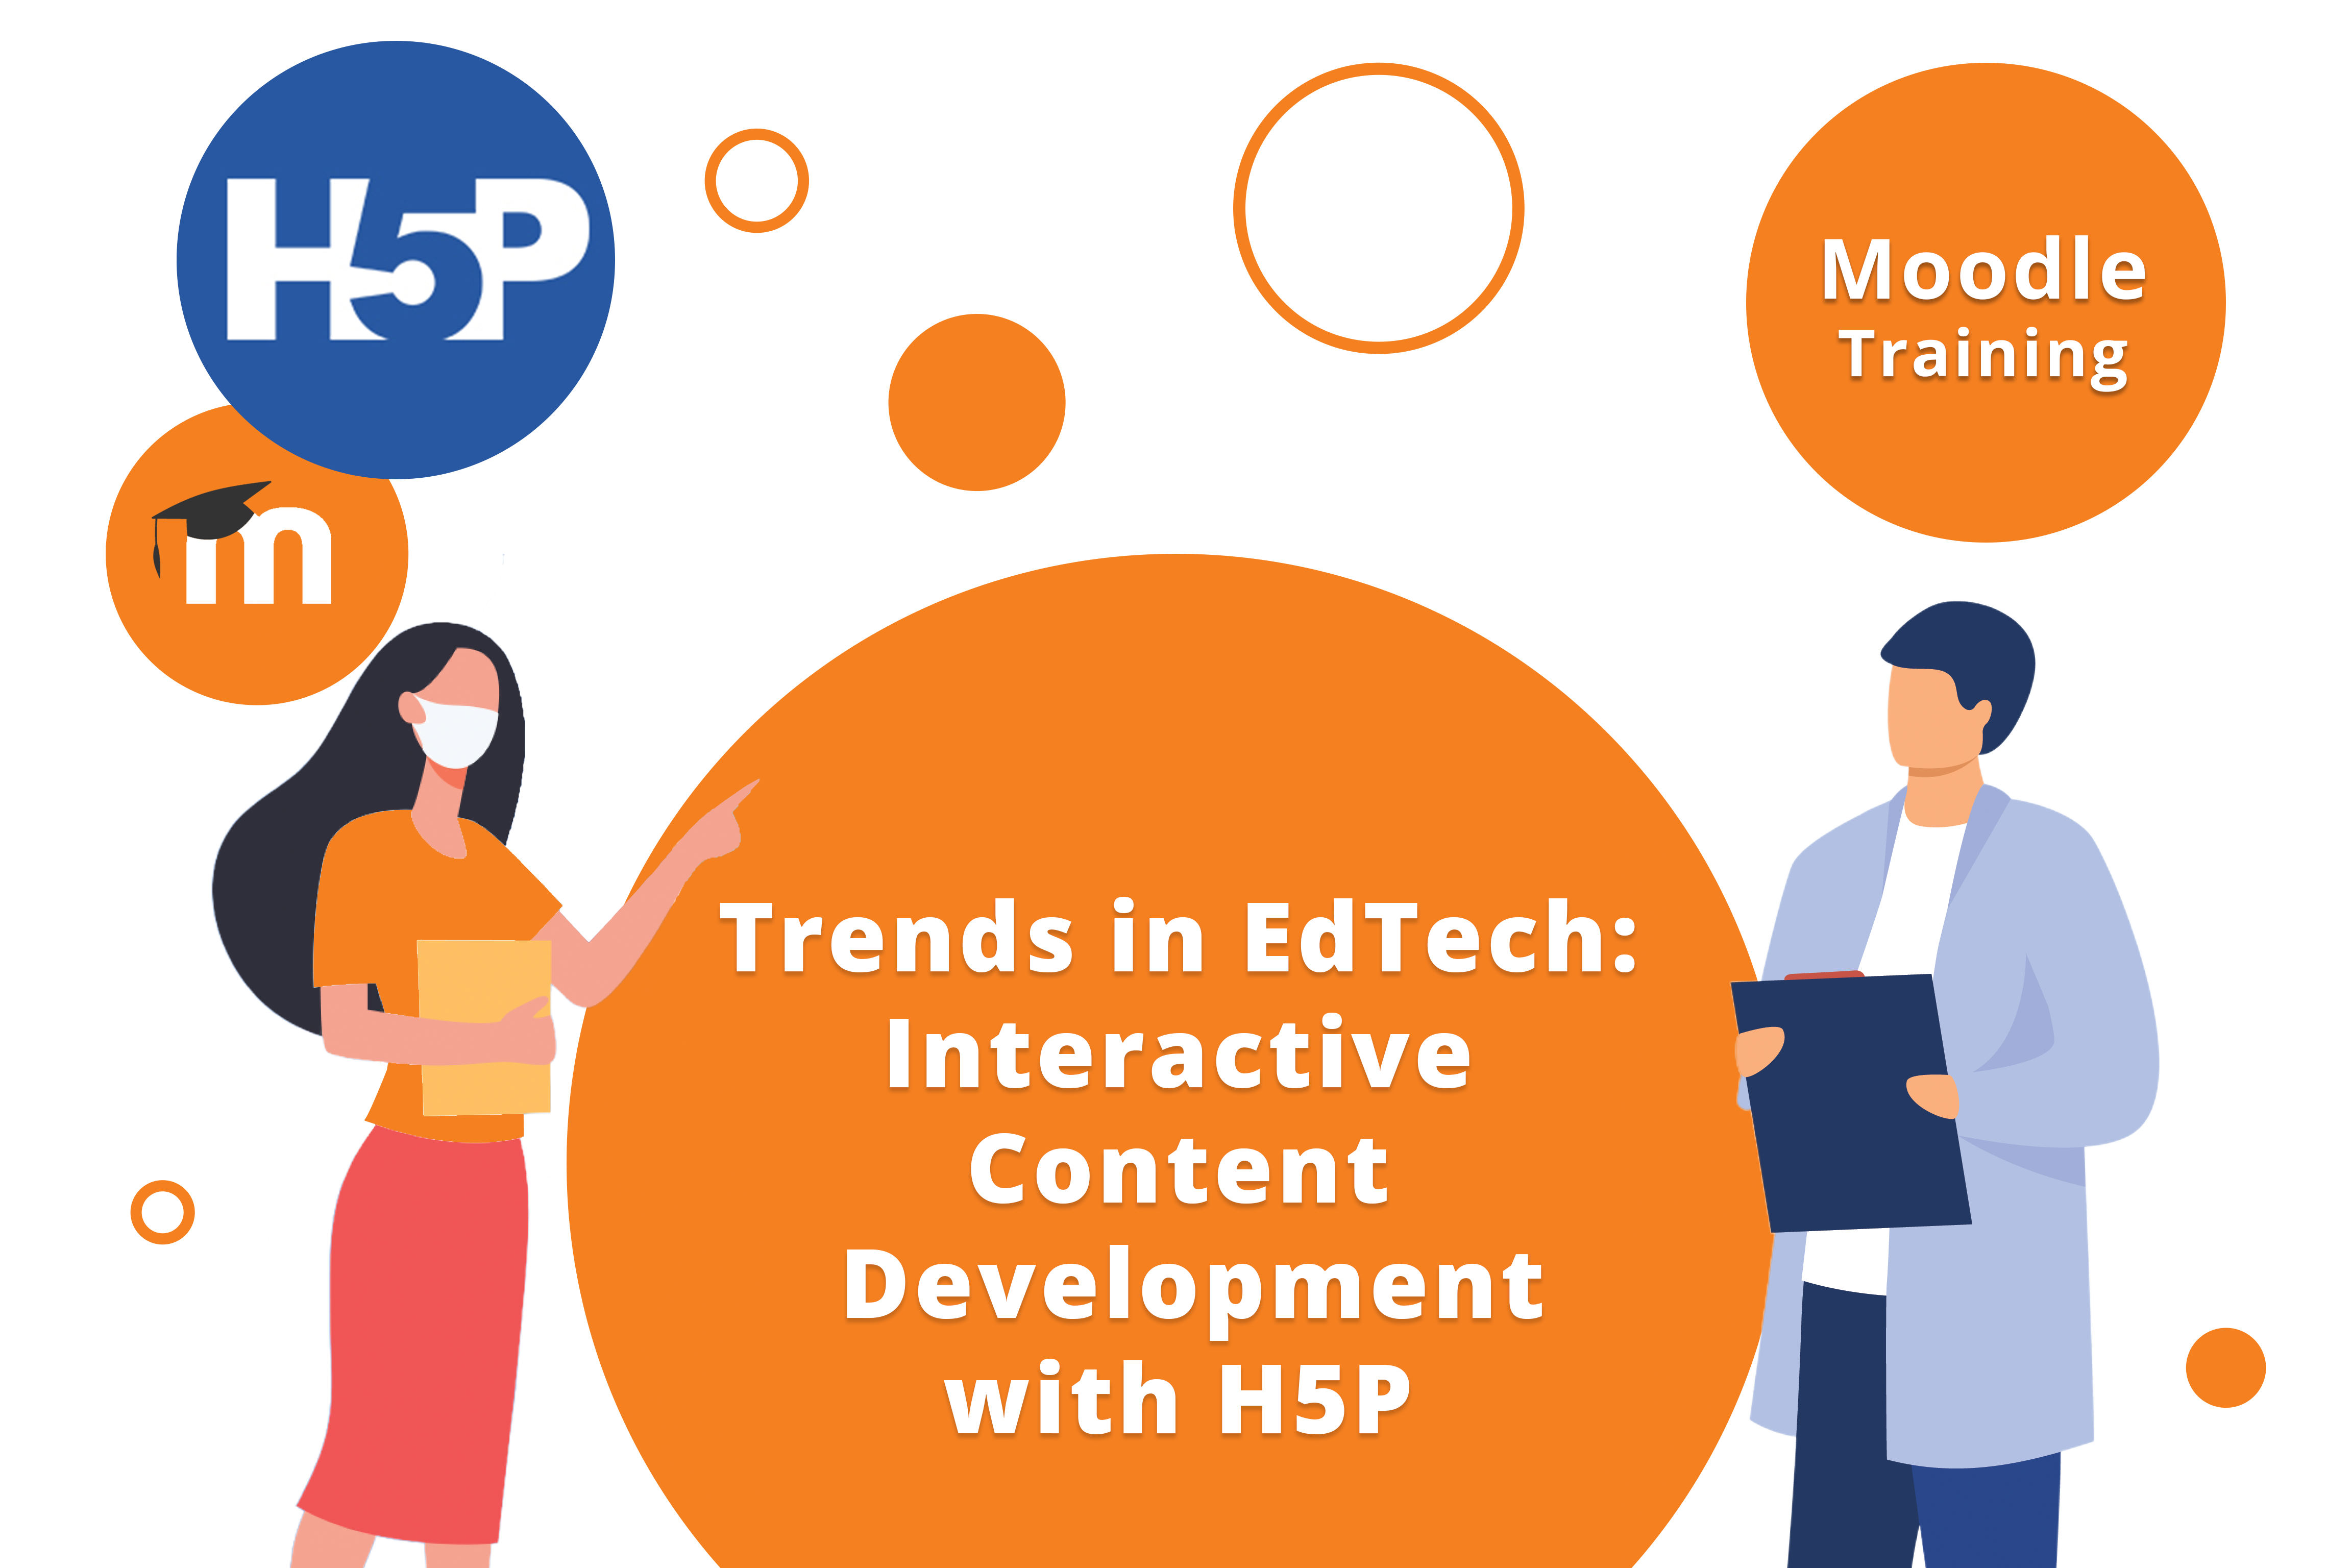  Trends in EdTech: Interactive Content Development with H5P